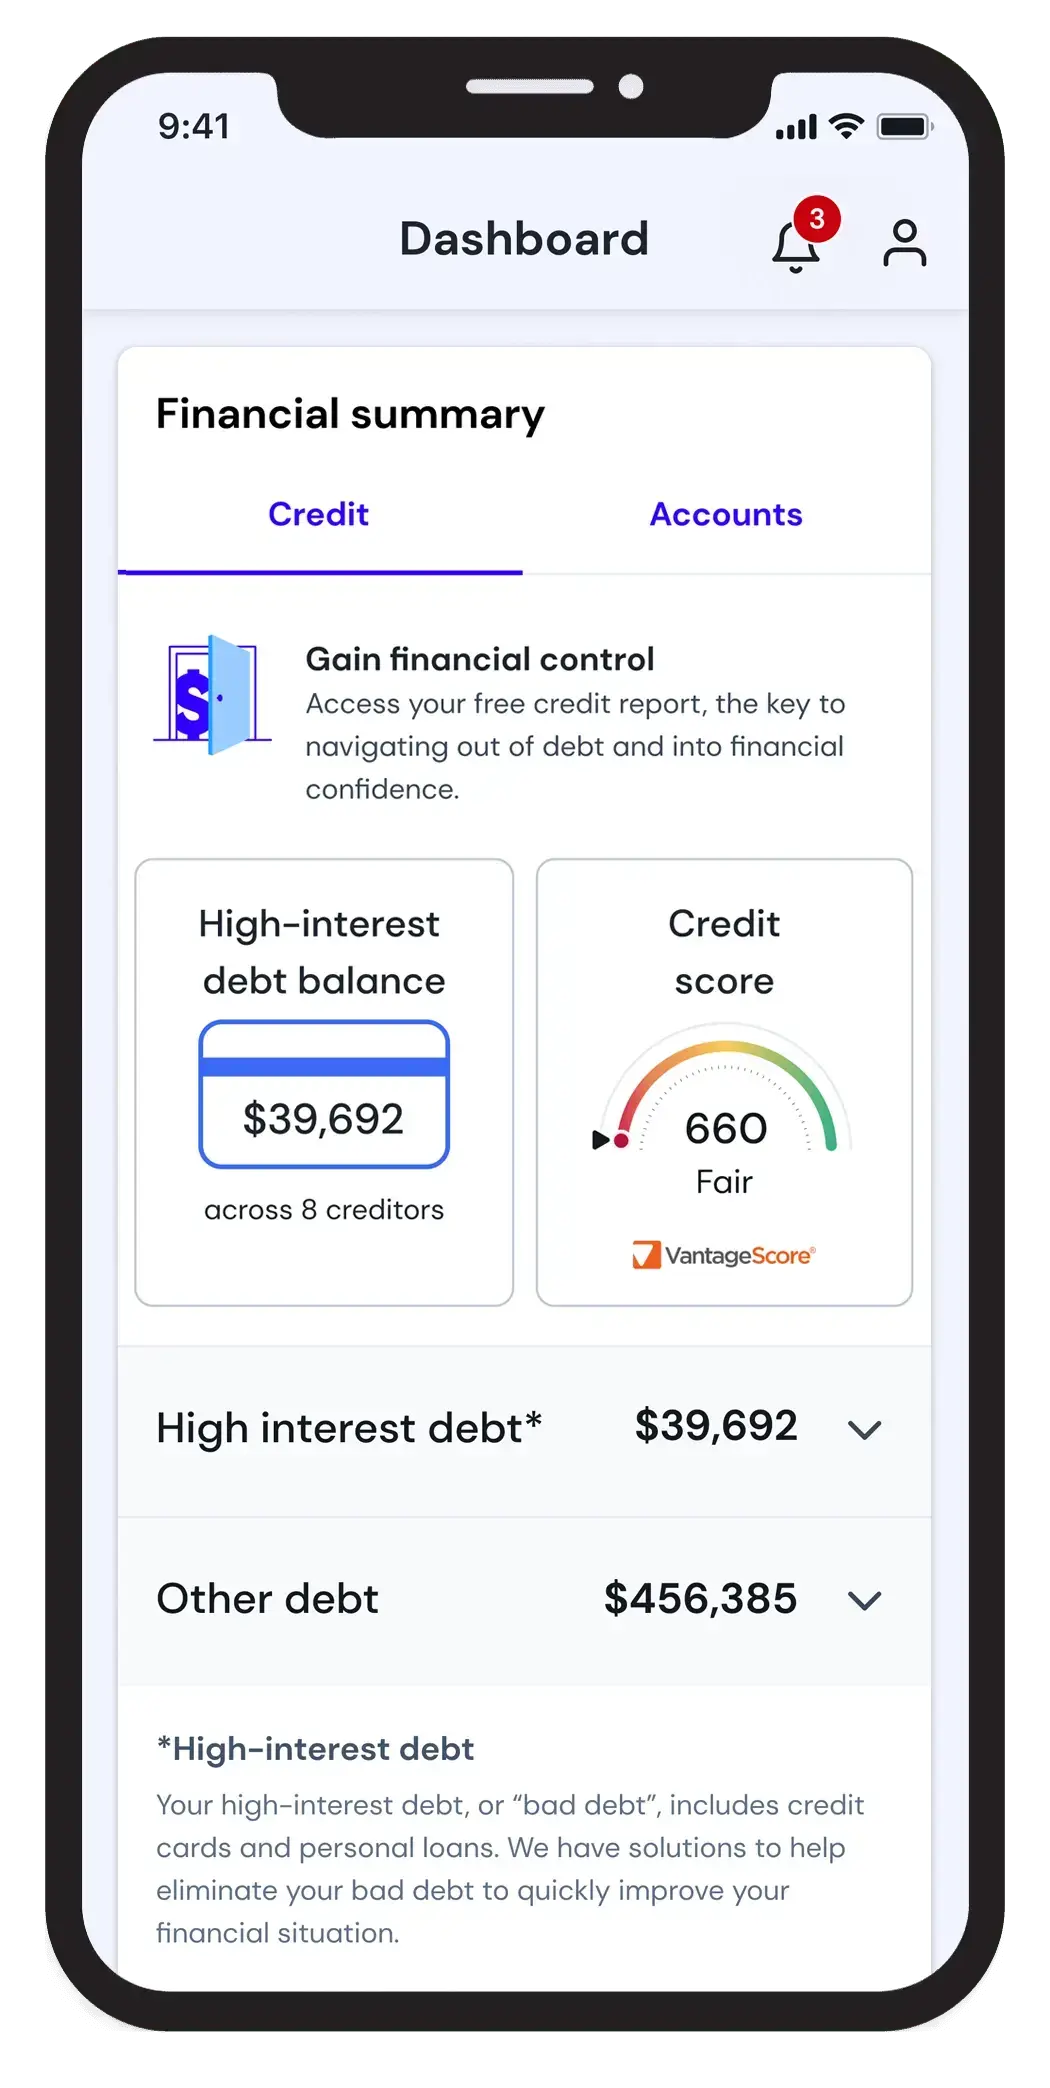 A dashboard showing a Get Out of Debt plan and their credit summary with FICO score and total debt.